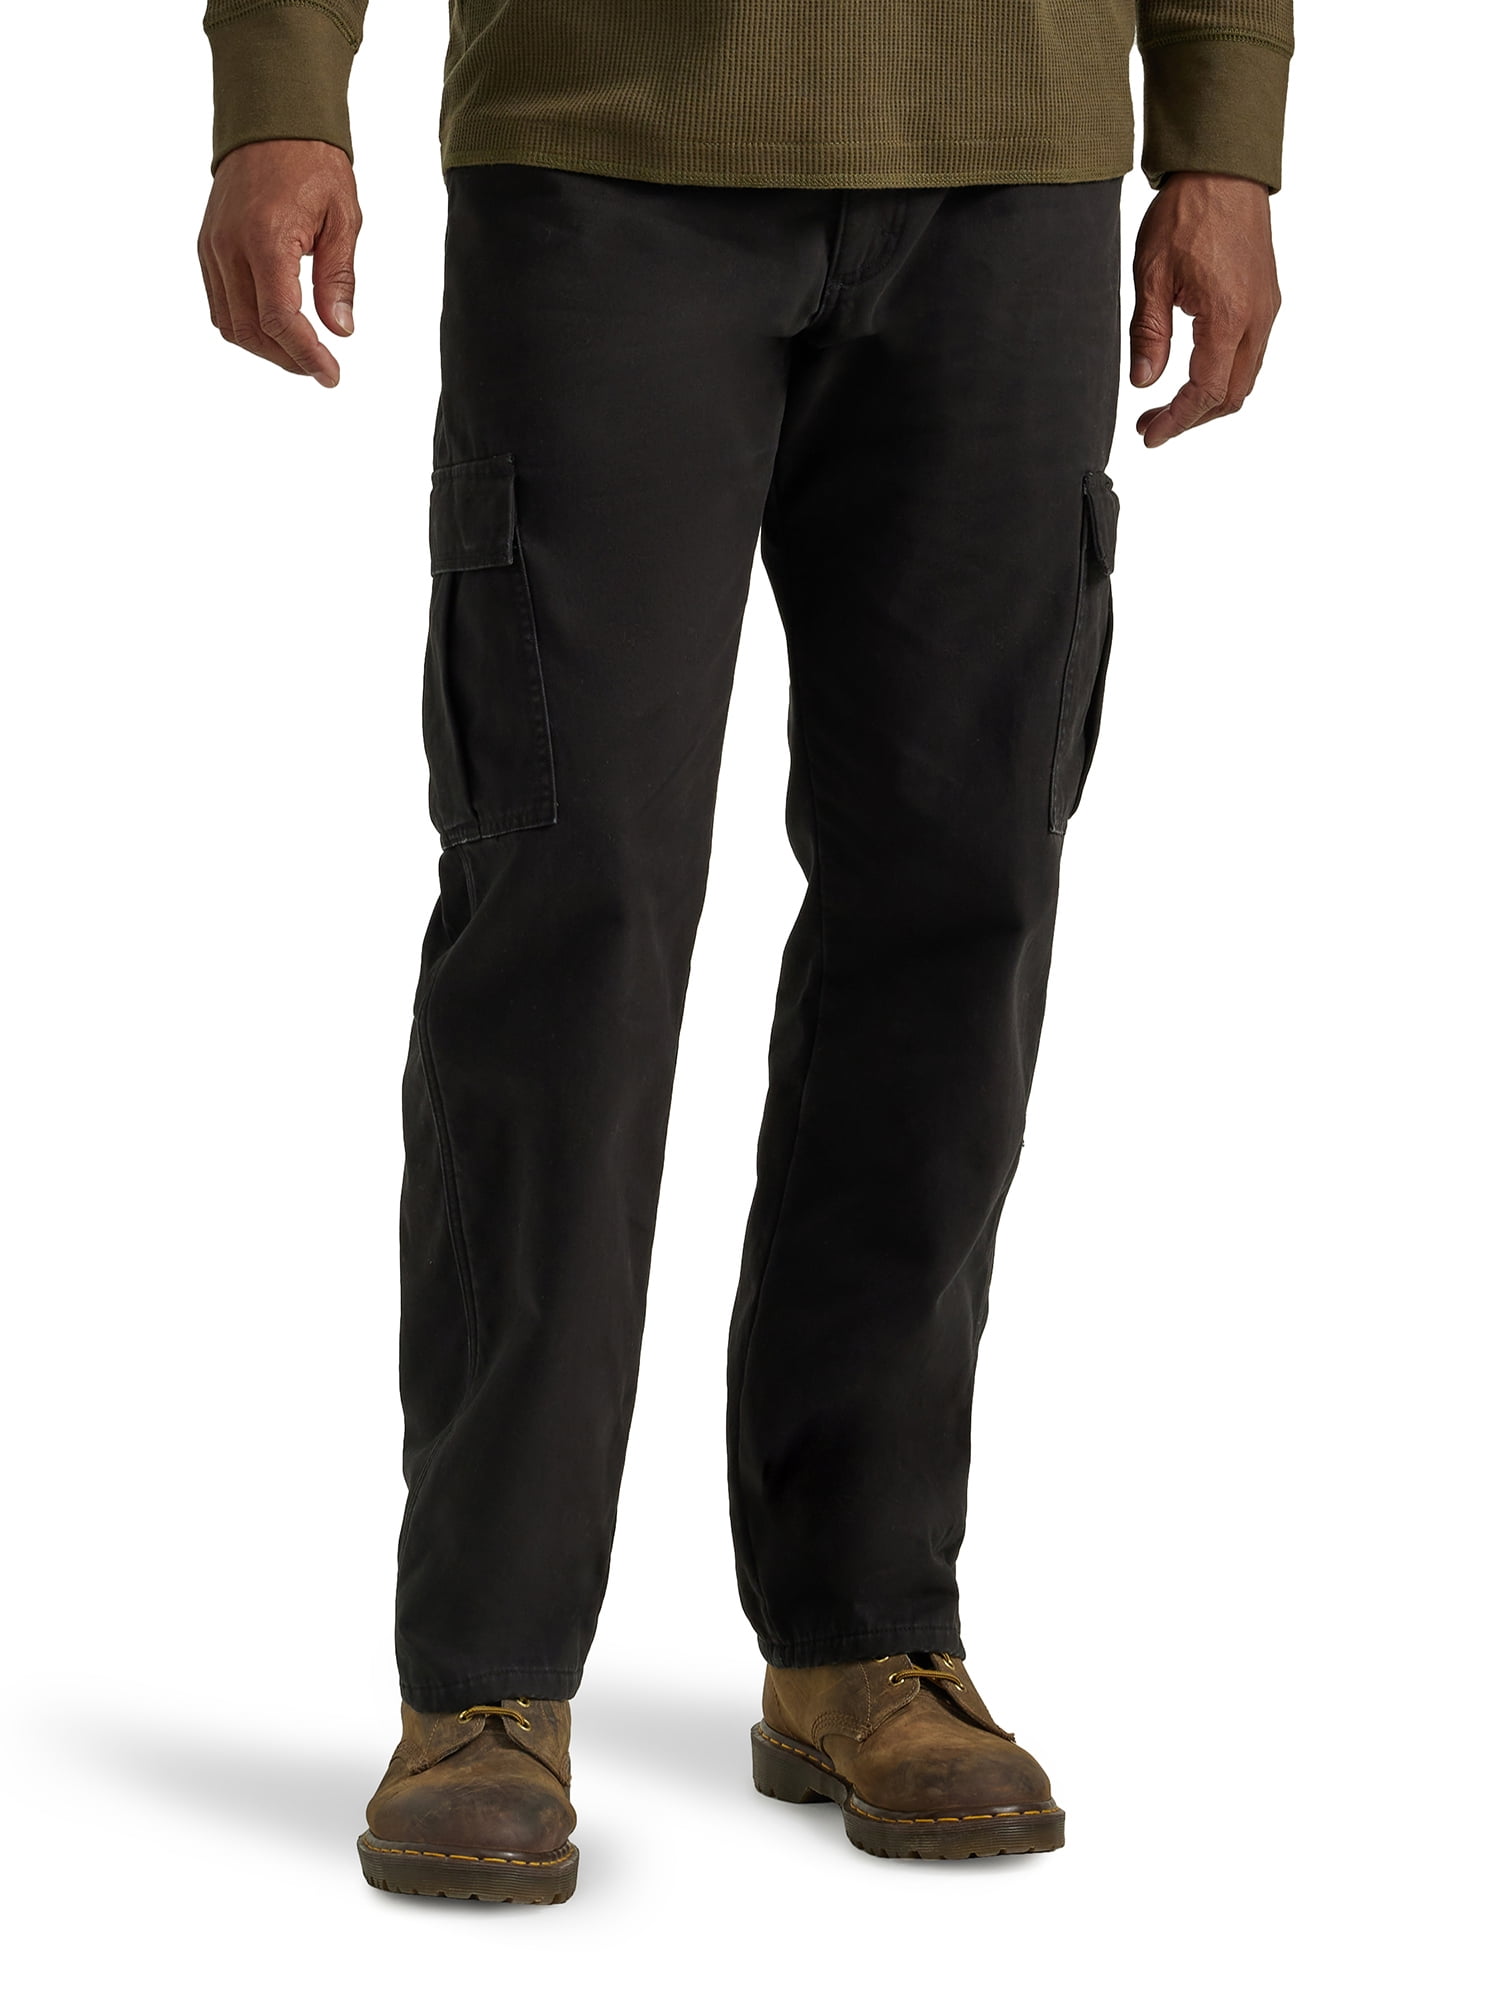 Wrangler® Men's and Big Men's Relaxed Fit Fleece Lined Cargo Pant ...